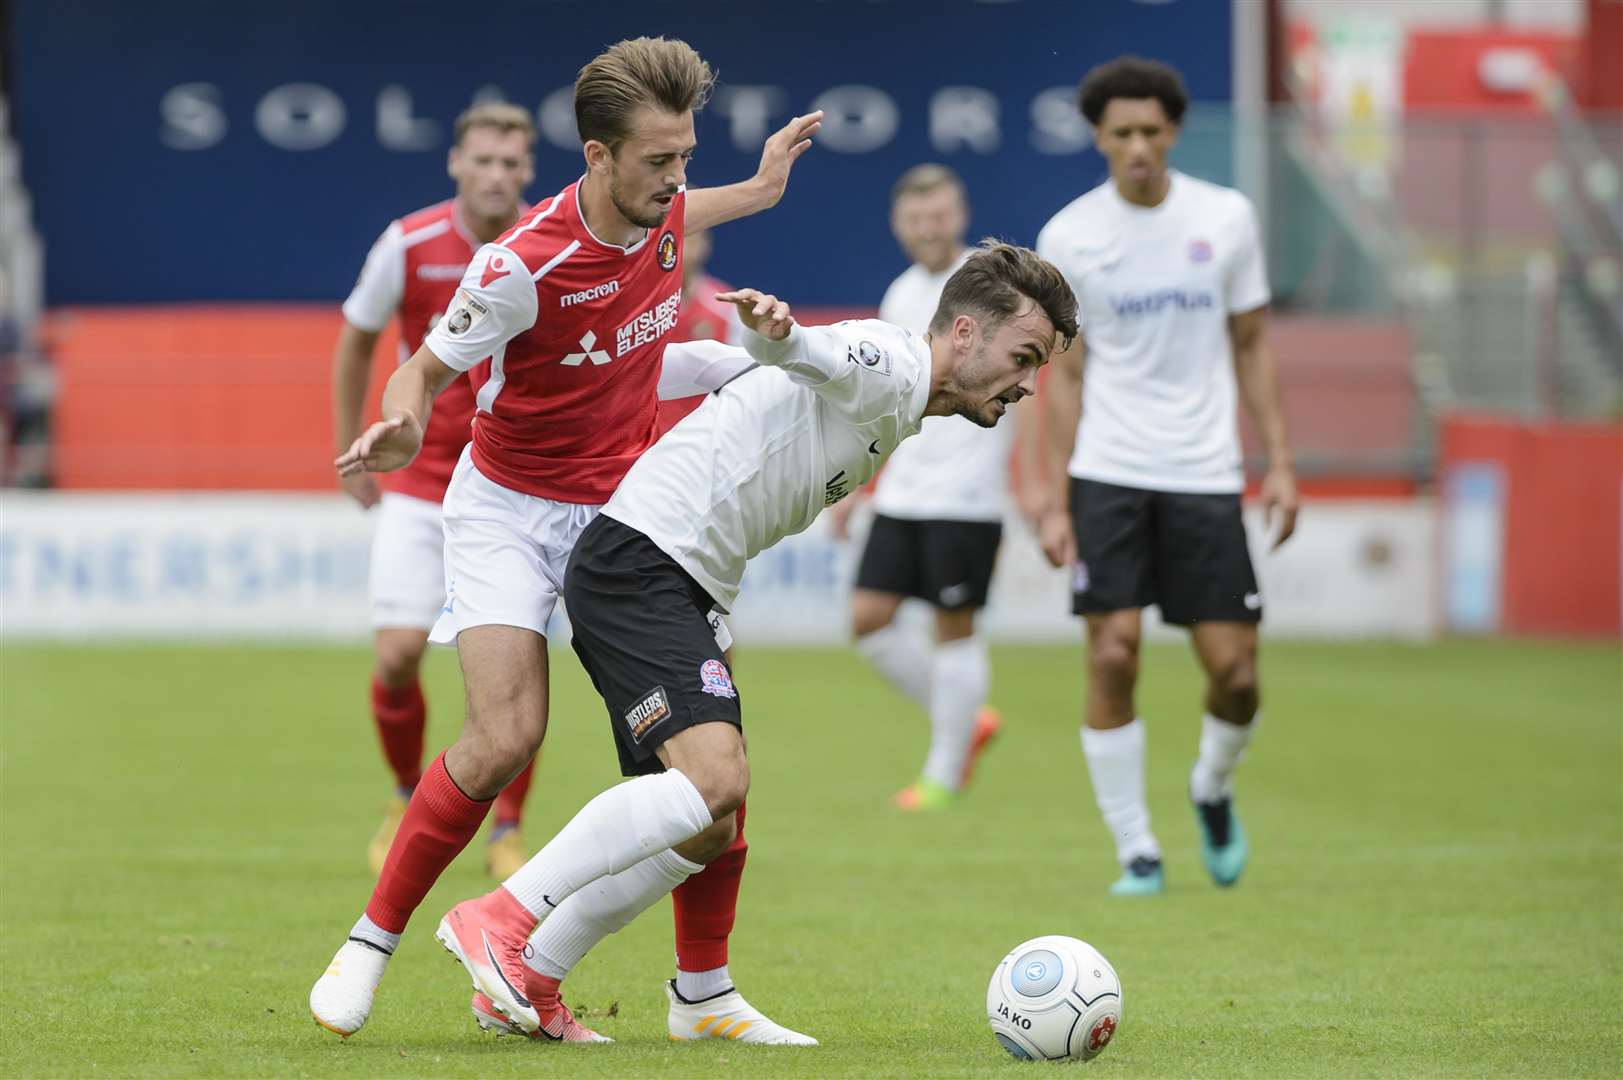 Jack Powell challenges for possession during Ebbsfleet's 3-3 draw with Fylde last season Picture: Andy Payton